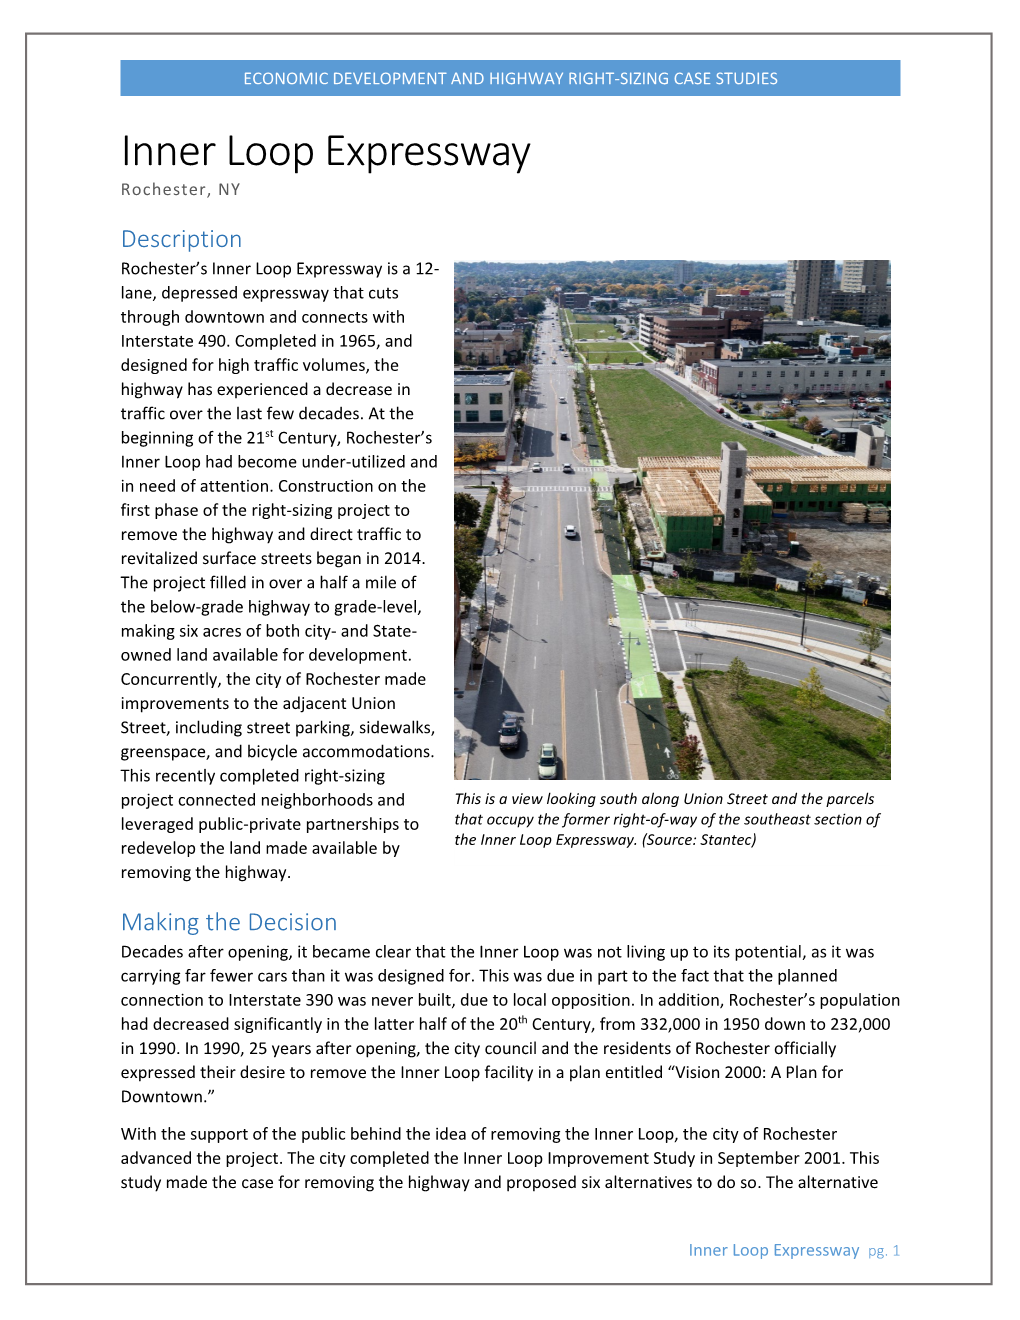 Economic Development and Highway Right-Sizing Case Studies